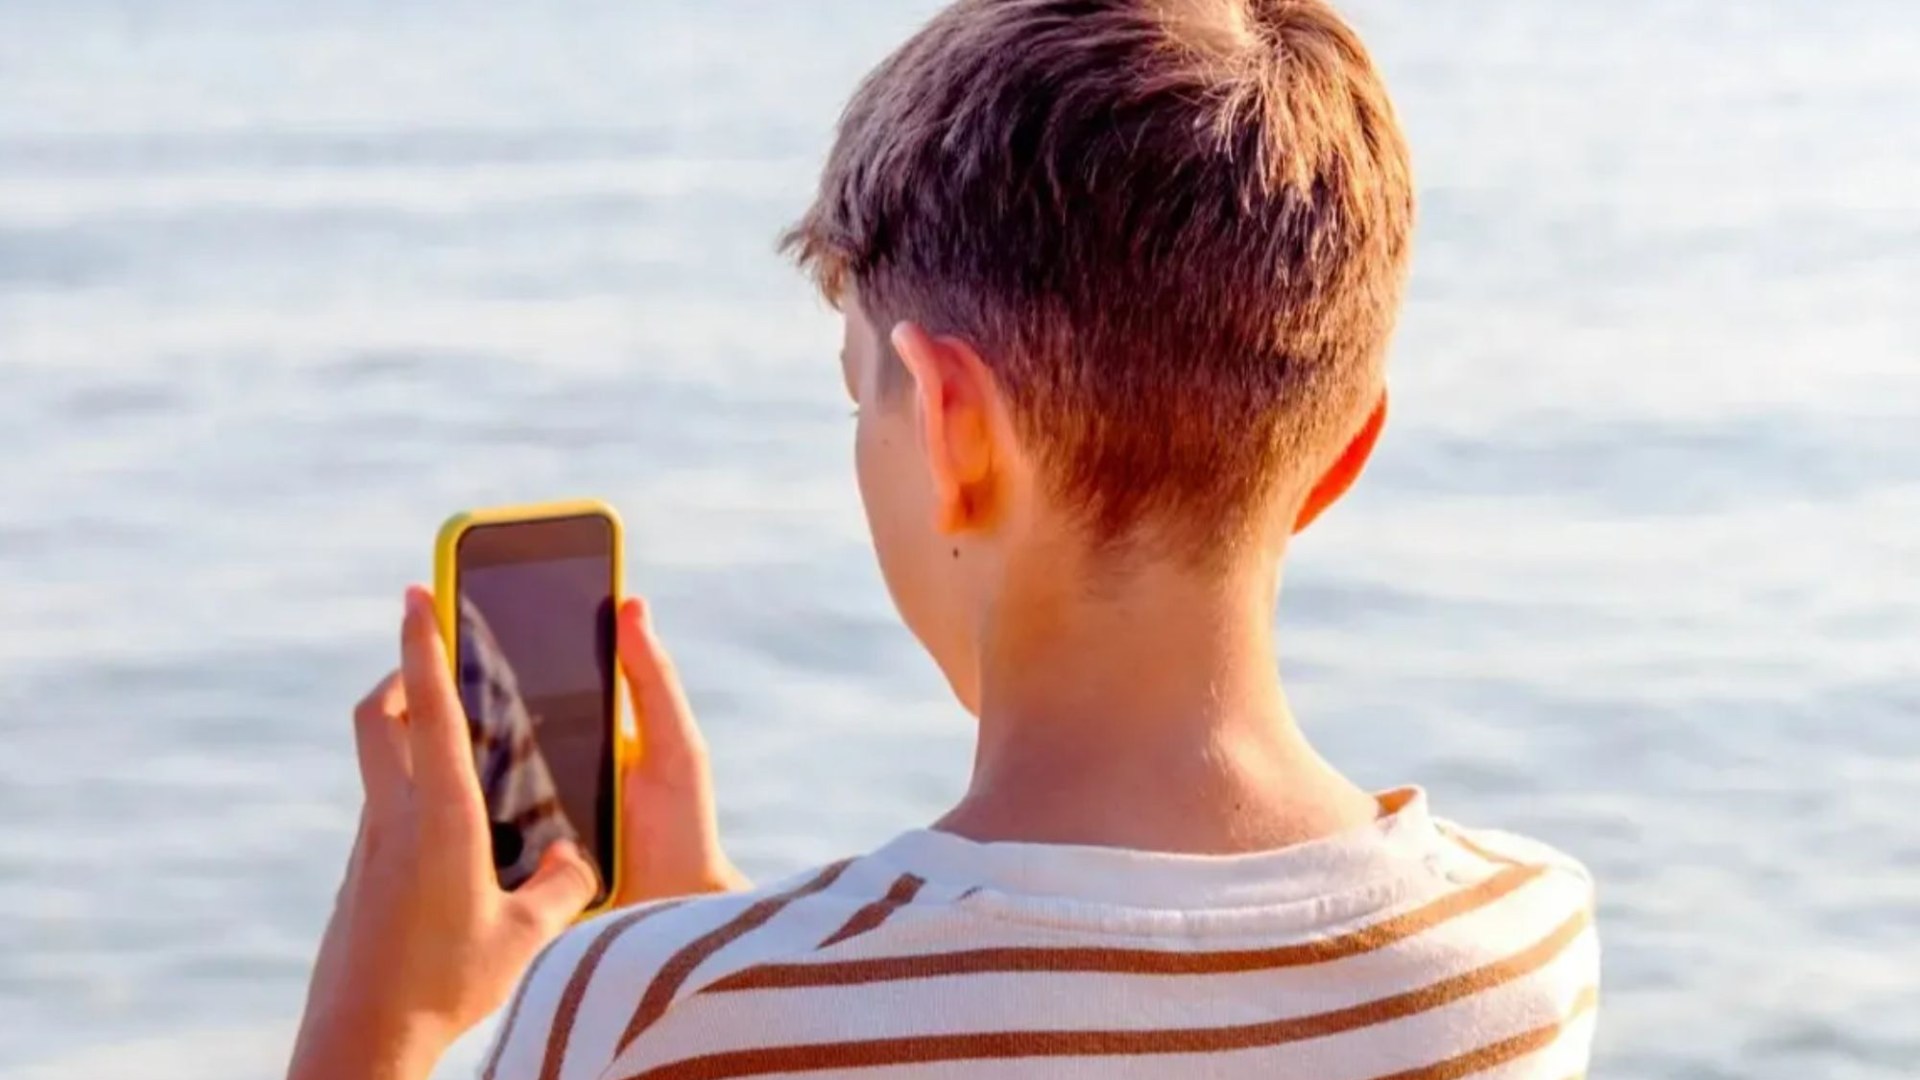 War on mobiles for kids ratchets up as Irish phone companies agree to Governments ban plan in ‘proactive step’ [Video]